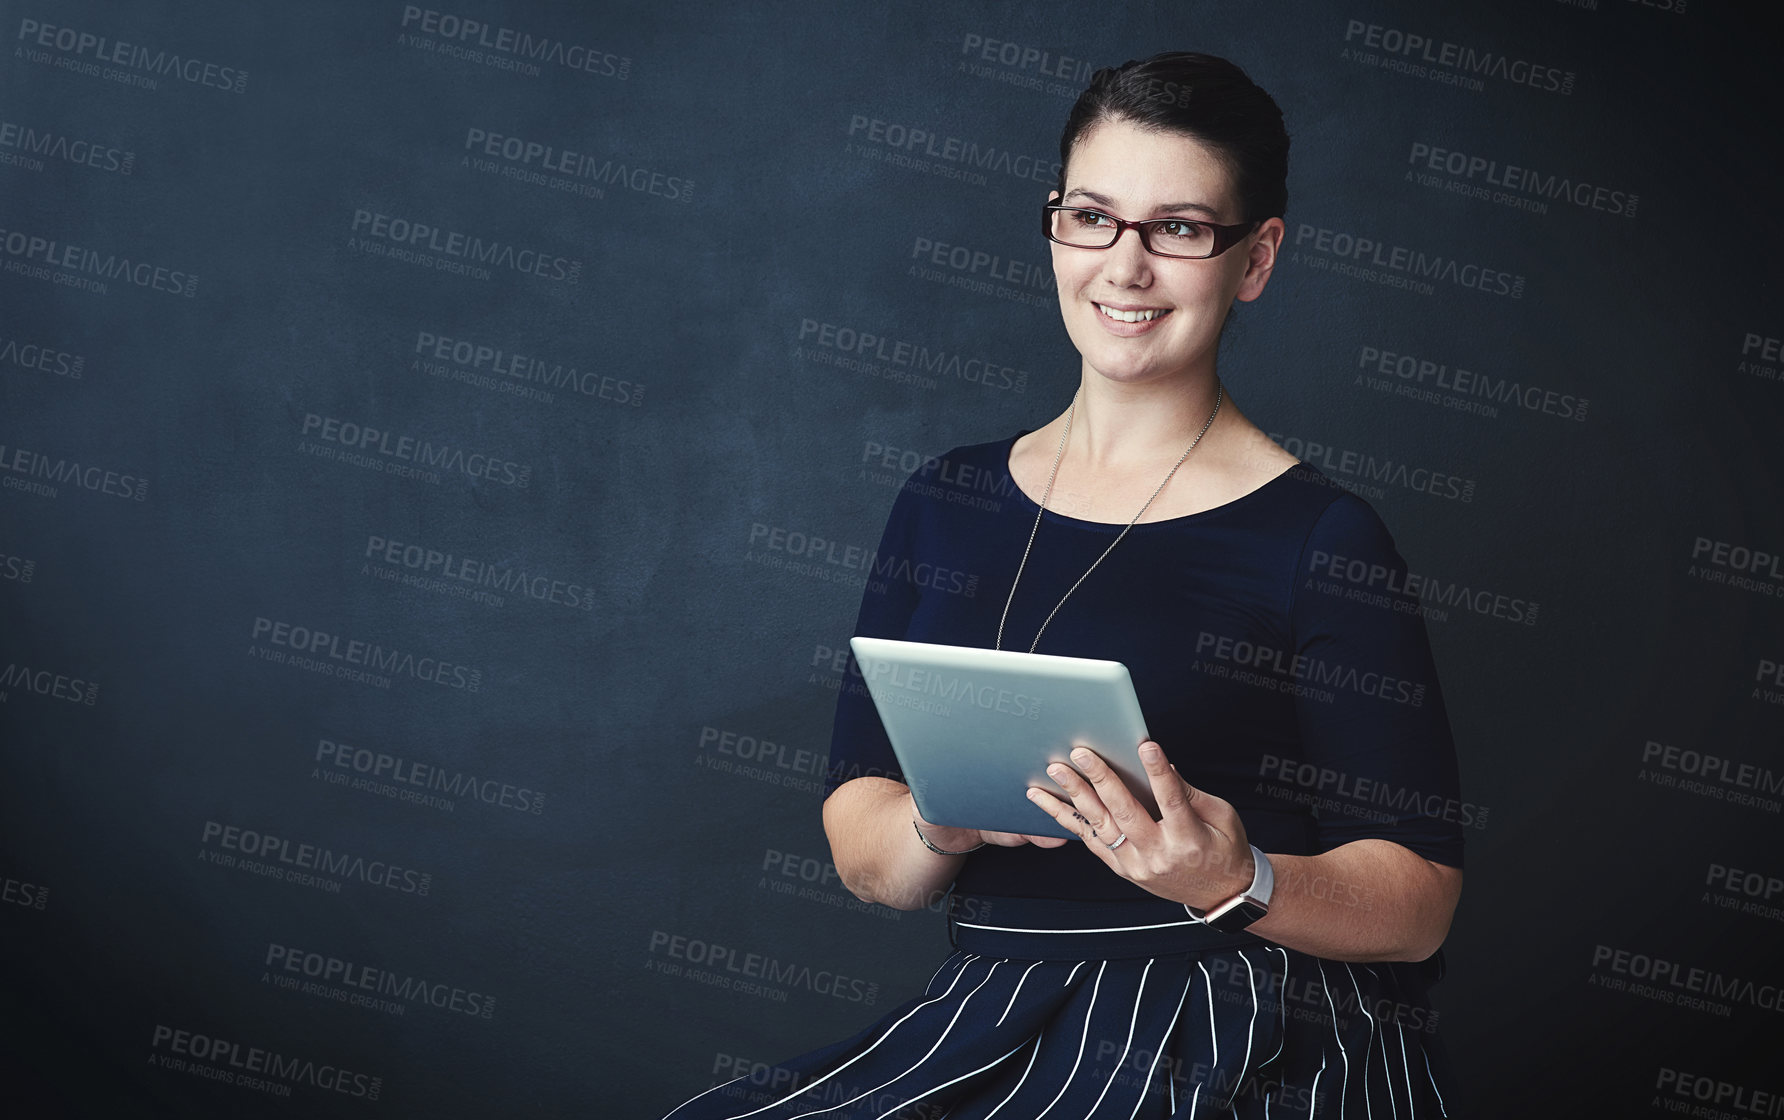 Buy stock photo Studio portrait of a corporate businesswoman using a digital tablet against a dark background